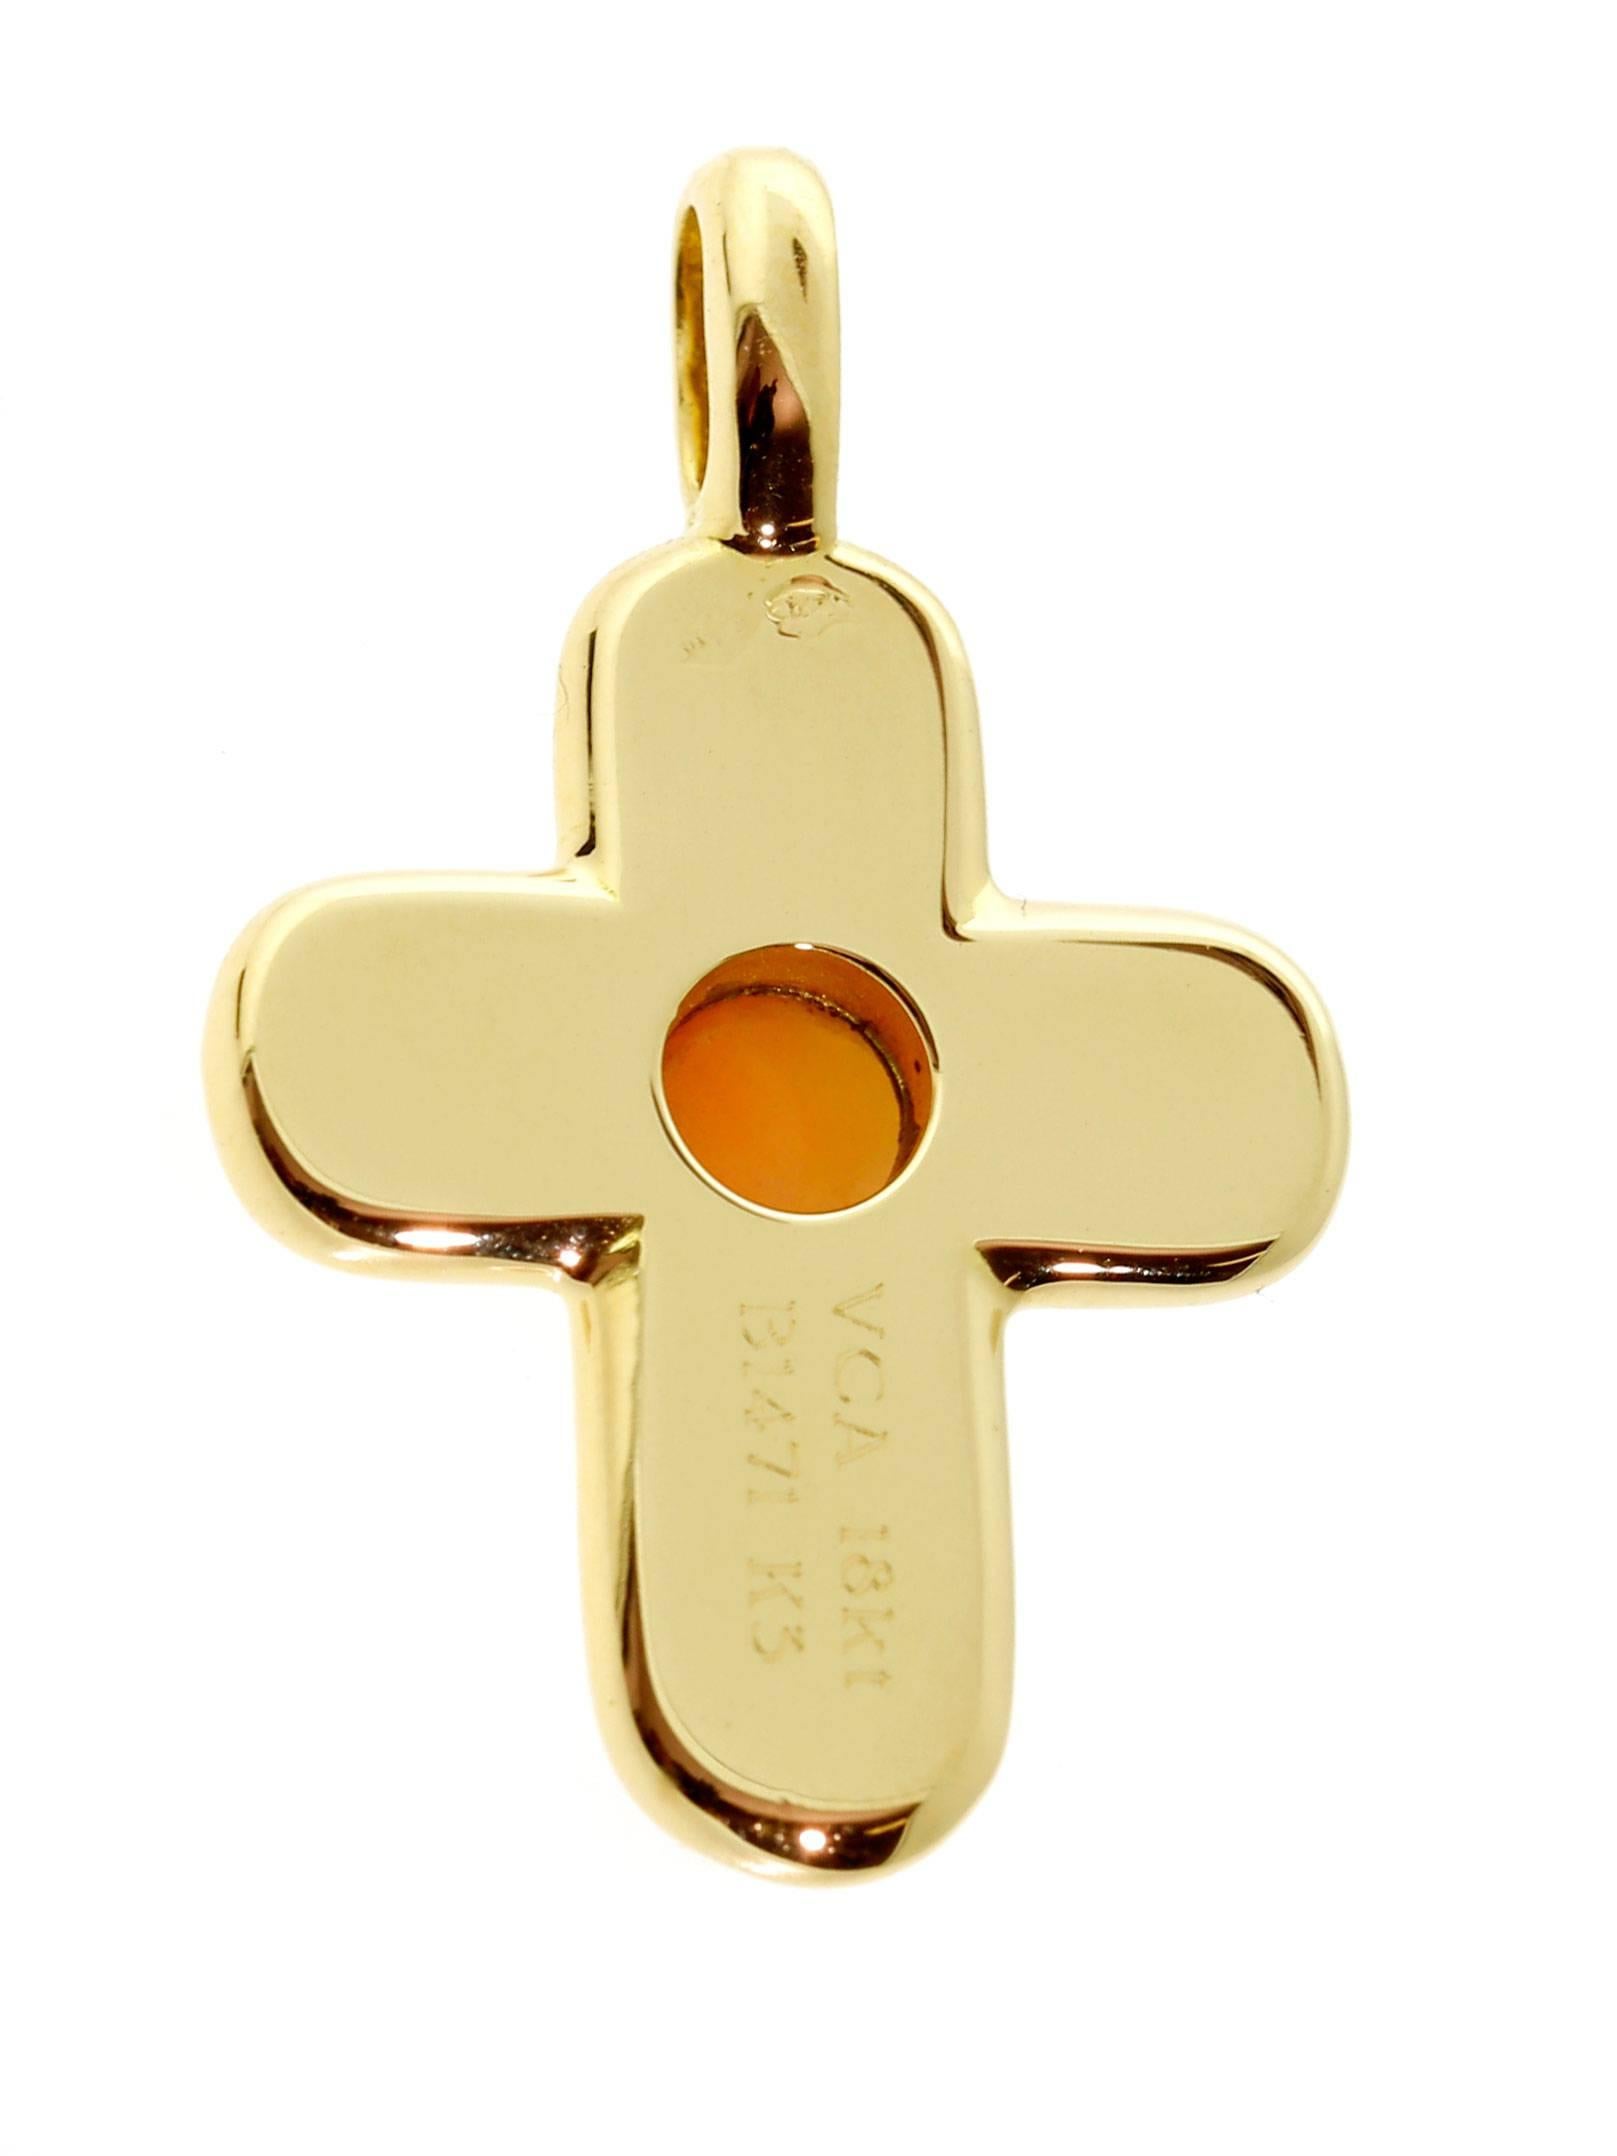 Cross Charm Pendant by Van Cleef & Arpels is an impeccable choice for the fashionable woman who’s proud to wear her heart on her sleeve. Made of 18k yellow gold and being just 1″ long, this piece could vividly complement just about any